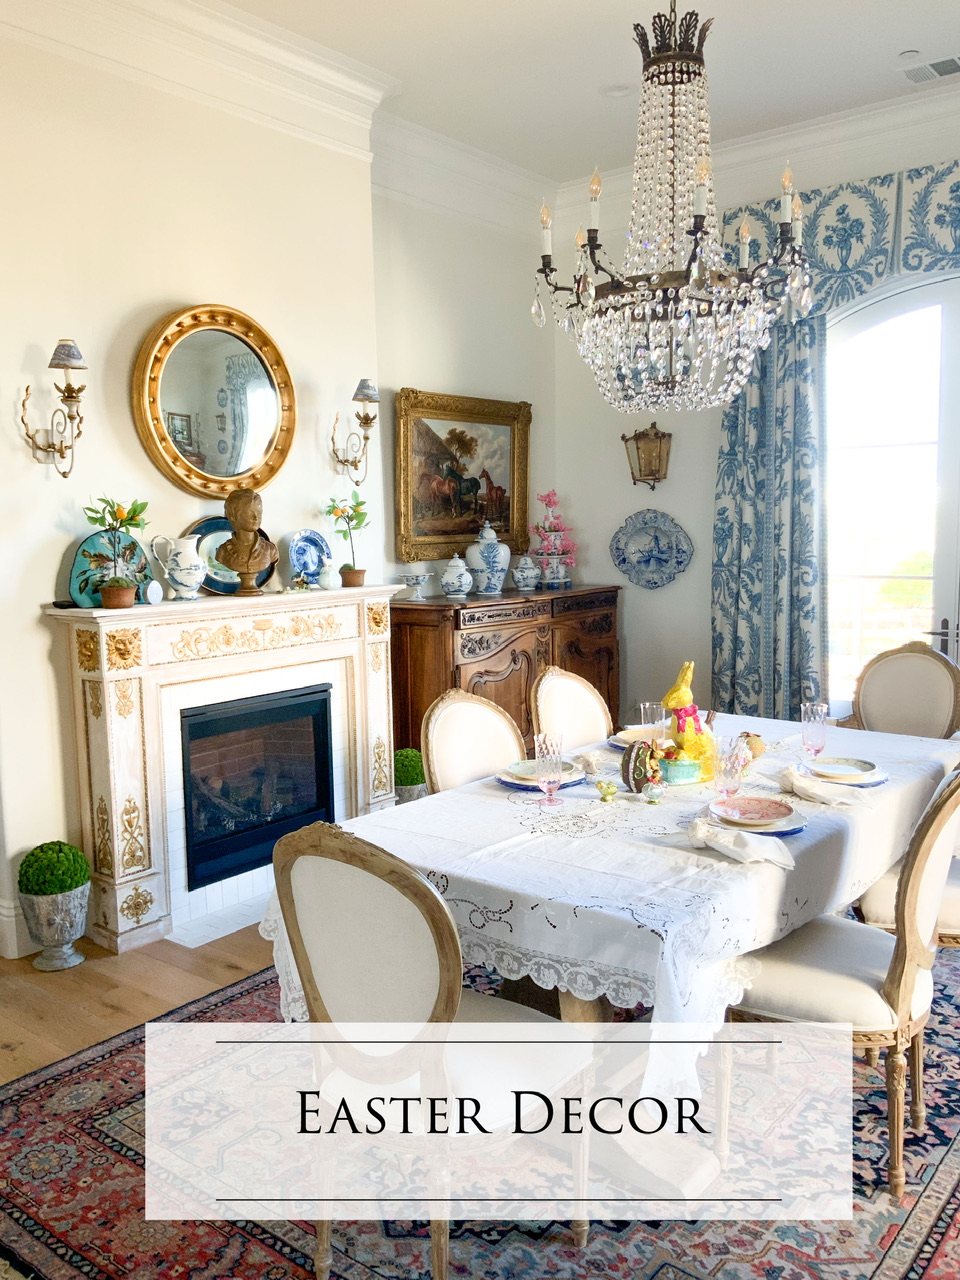 Easter Home Tour - Decorating my house for Easter with simple seasonal decor tips